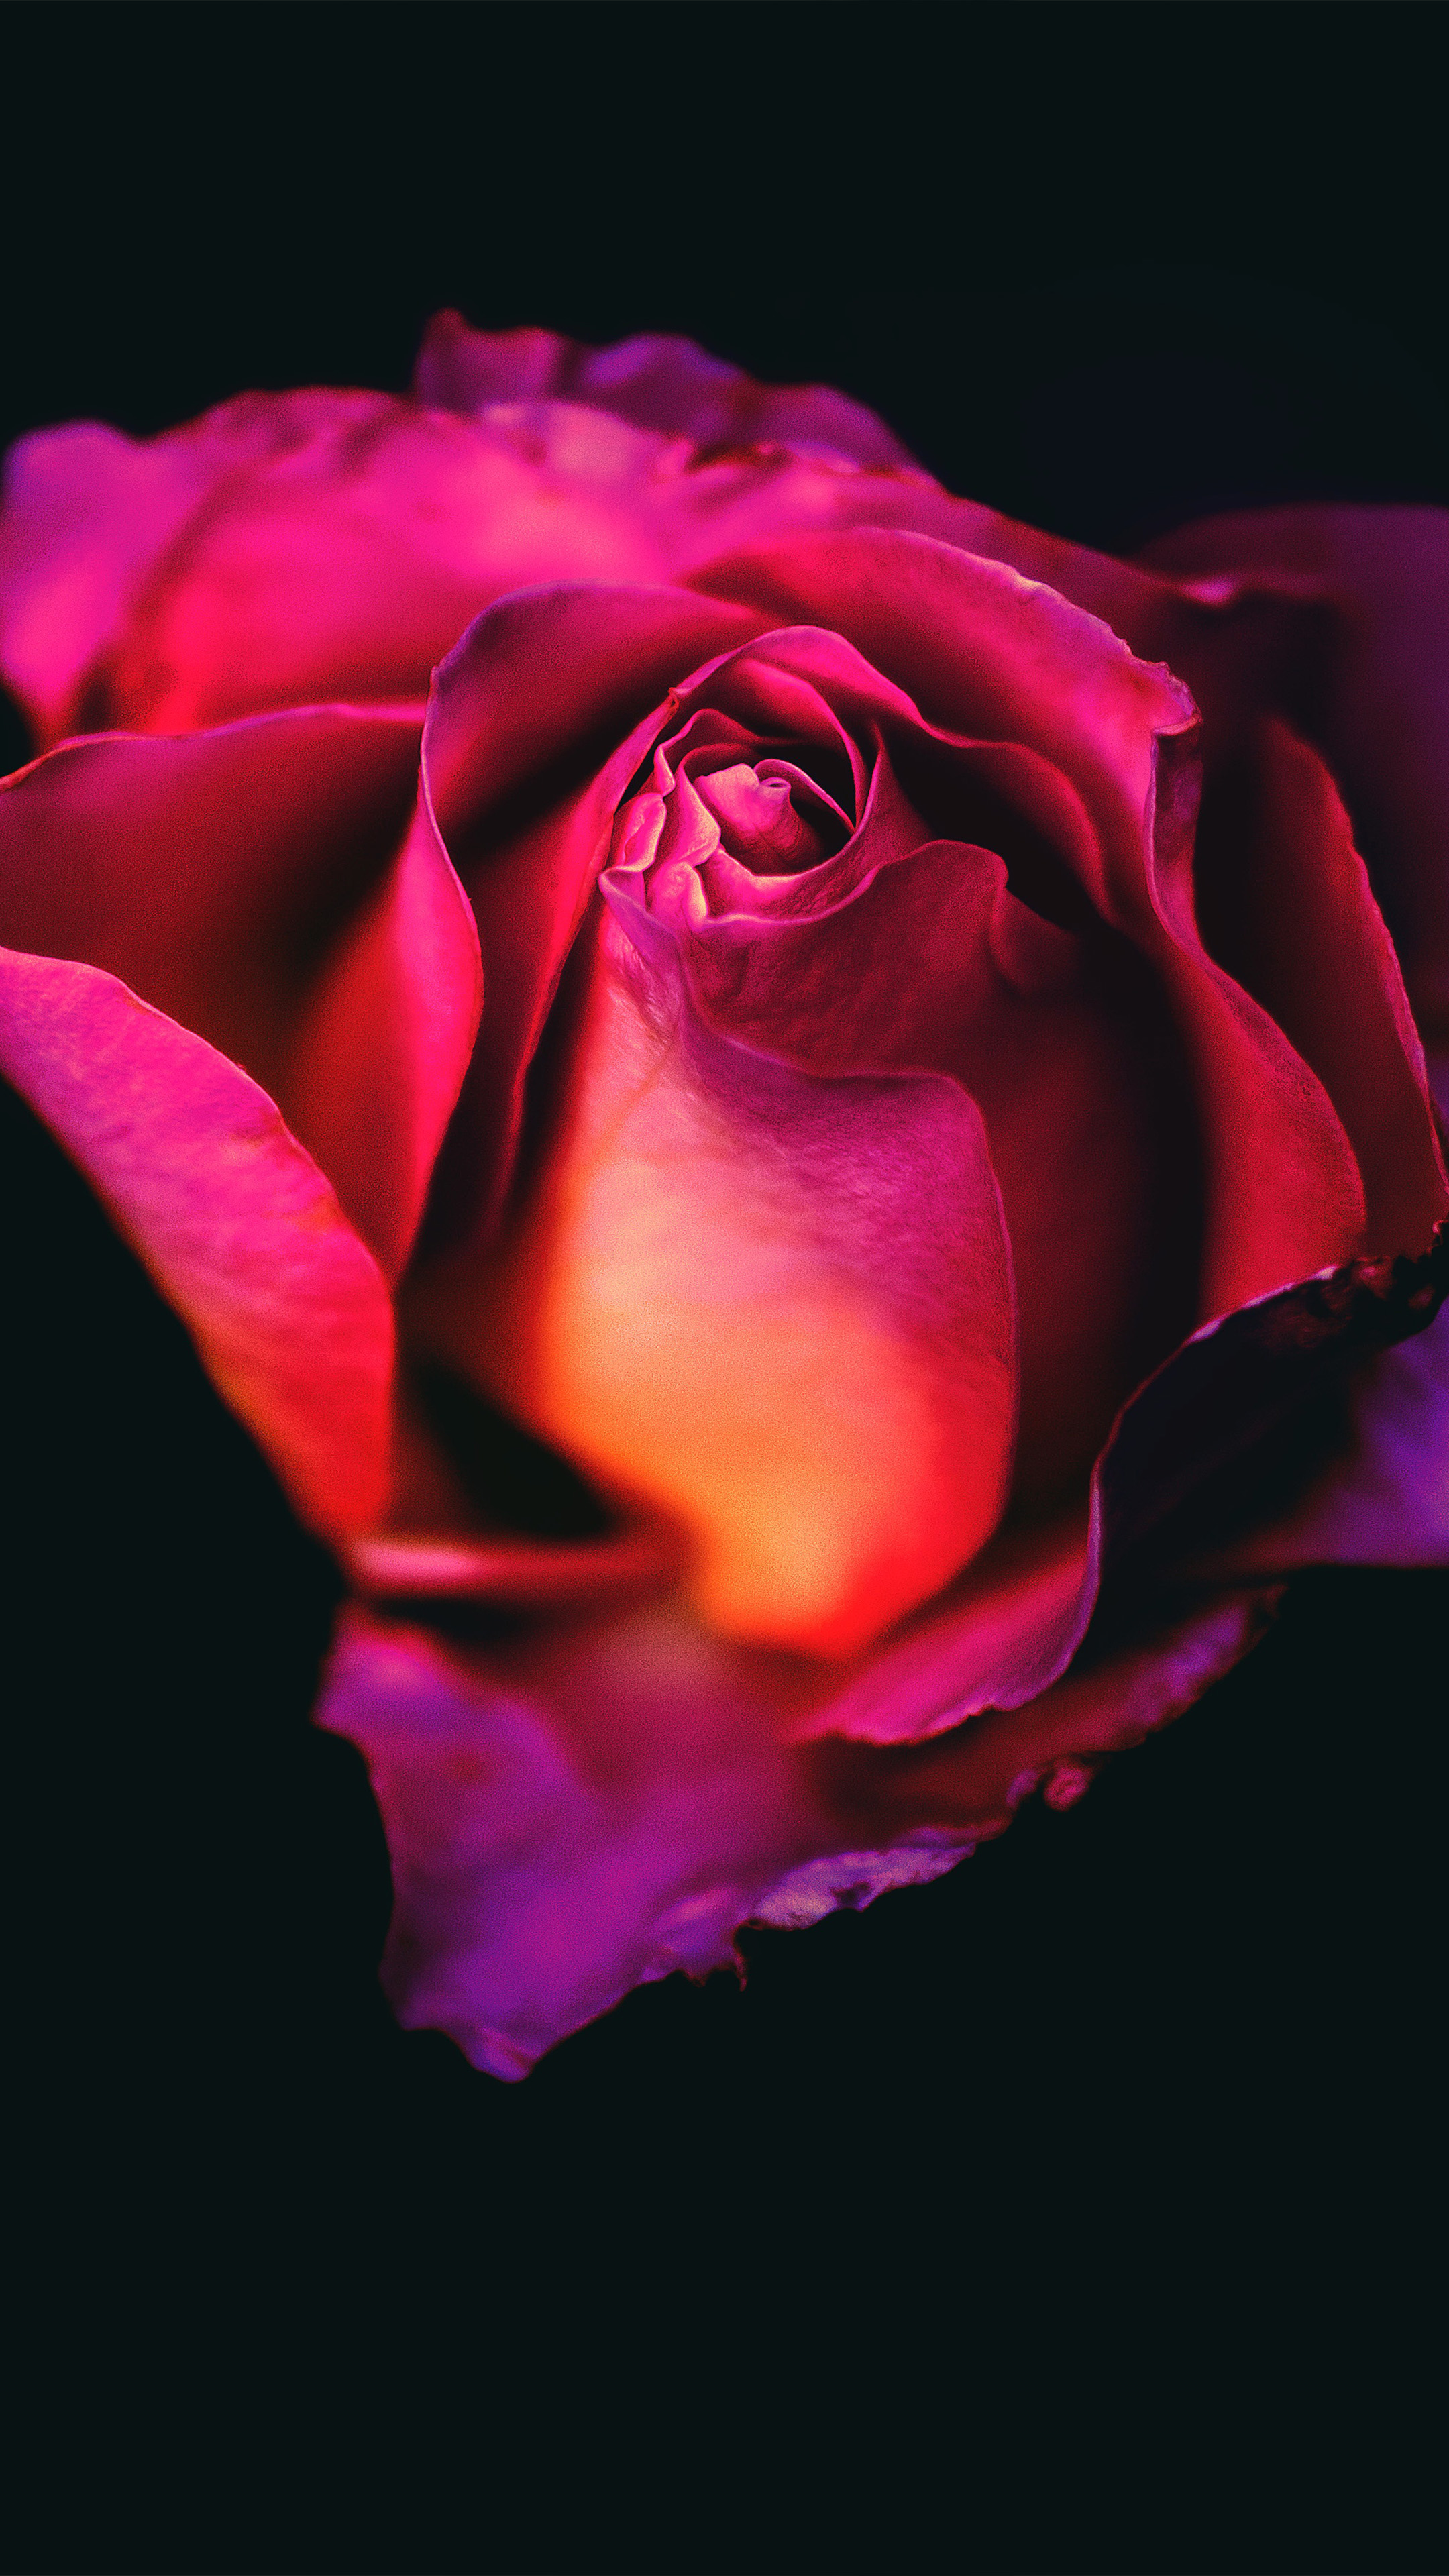 Hd Rose Wallpapers For Mobile Phones